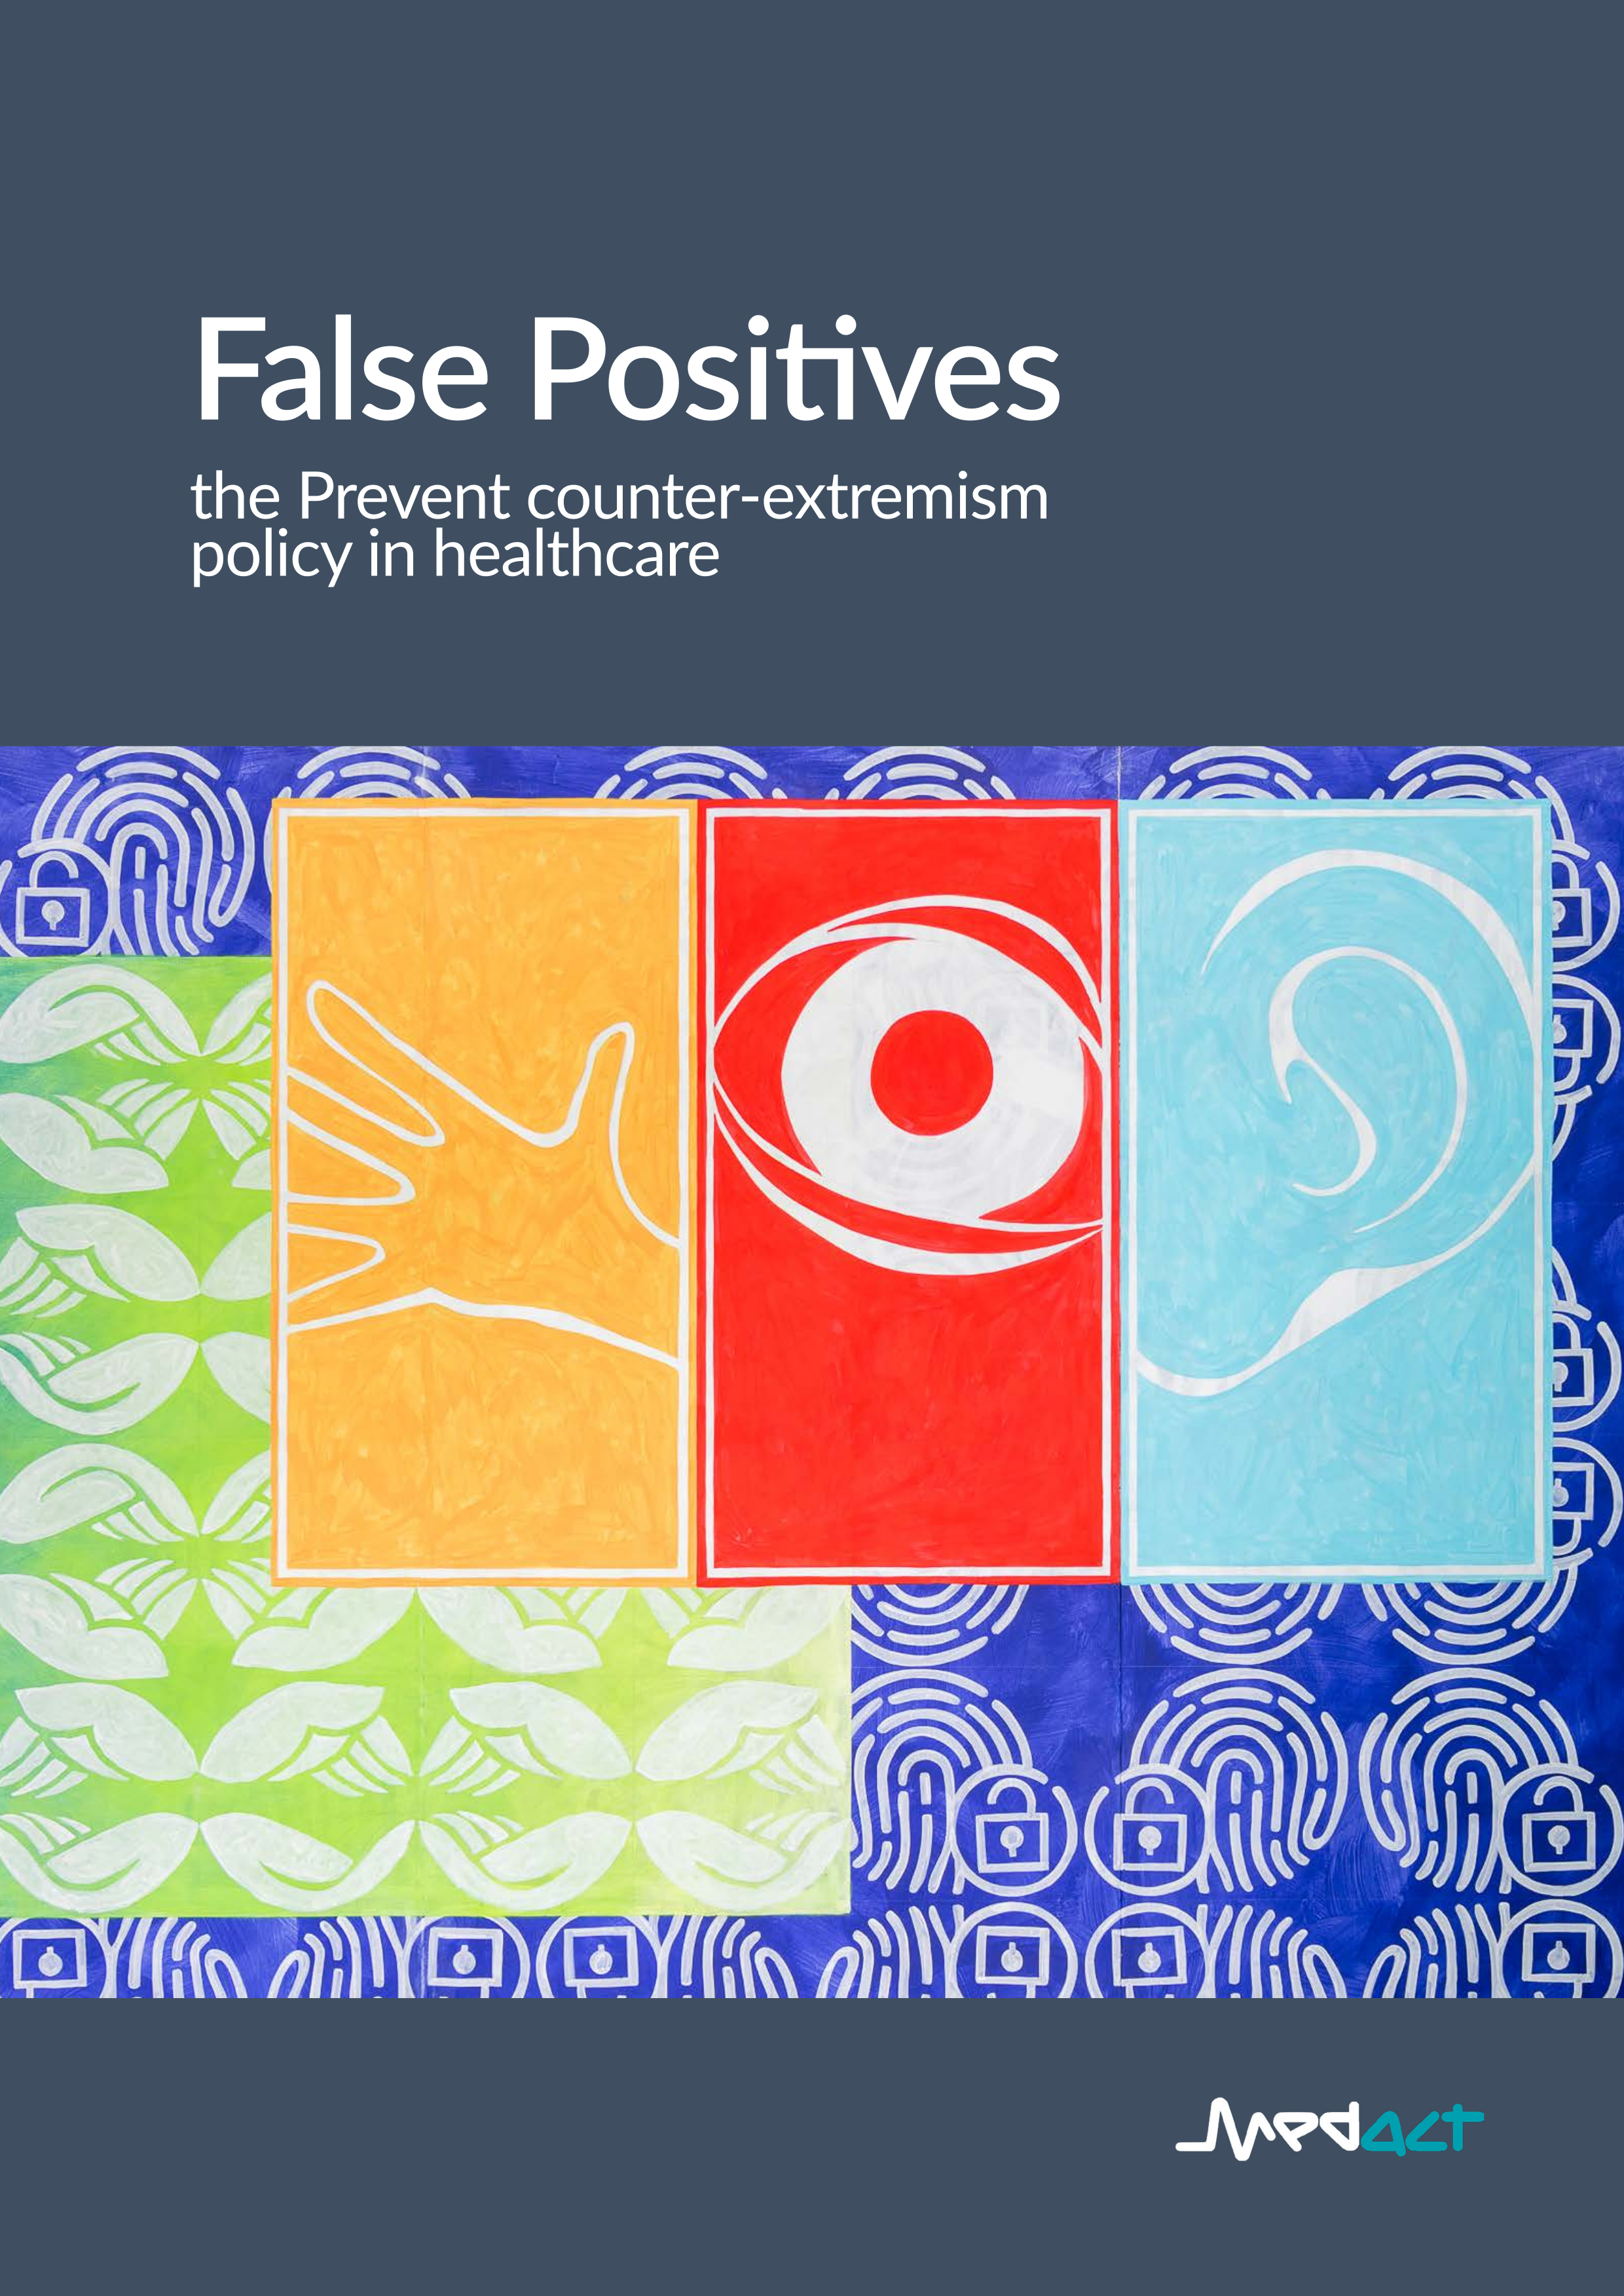 False Positives: the Prevent counter-extremism policy in healthcare